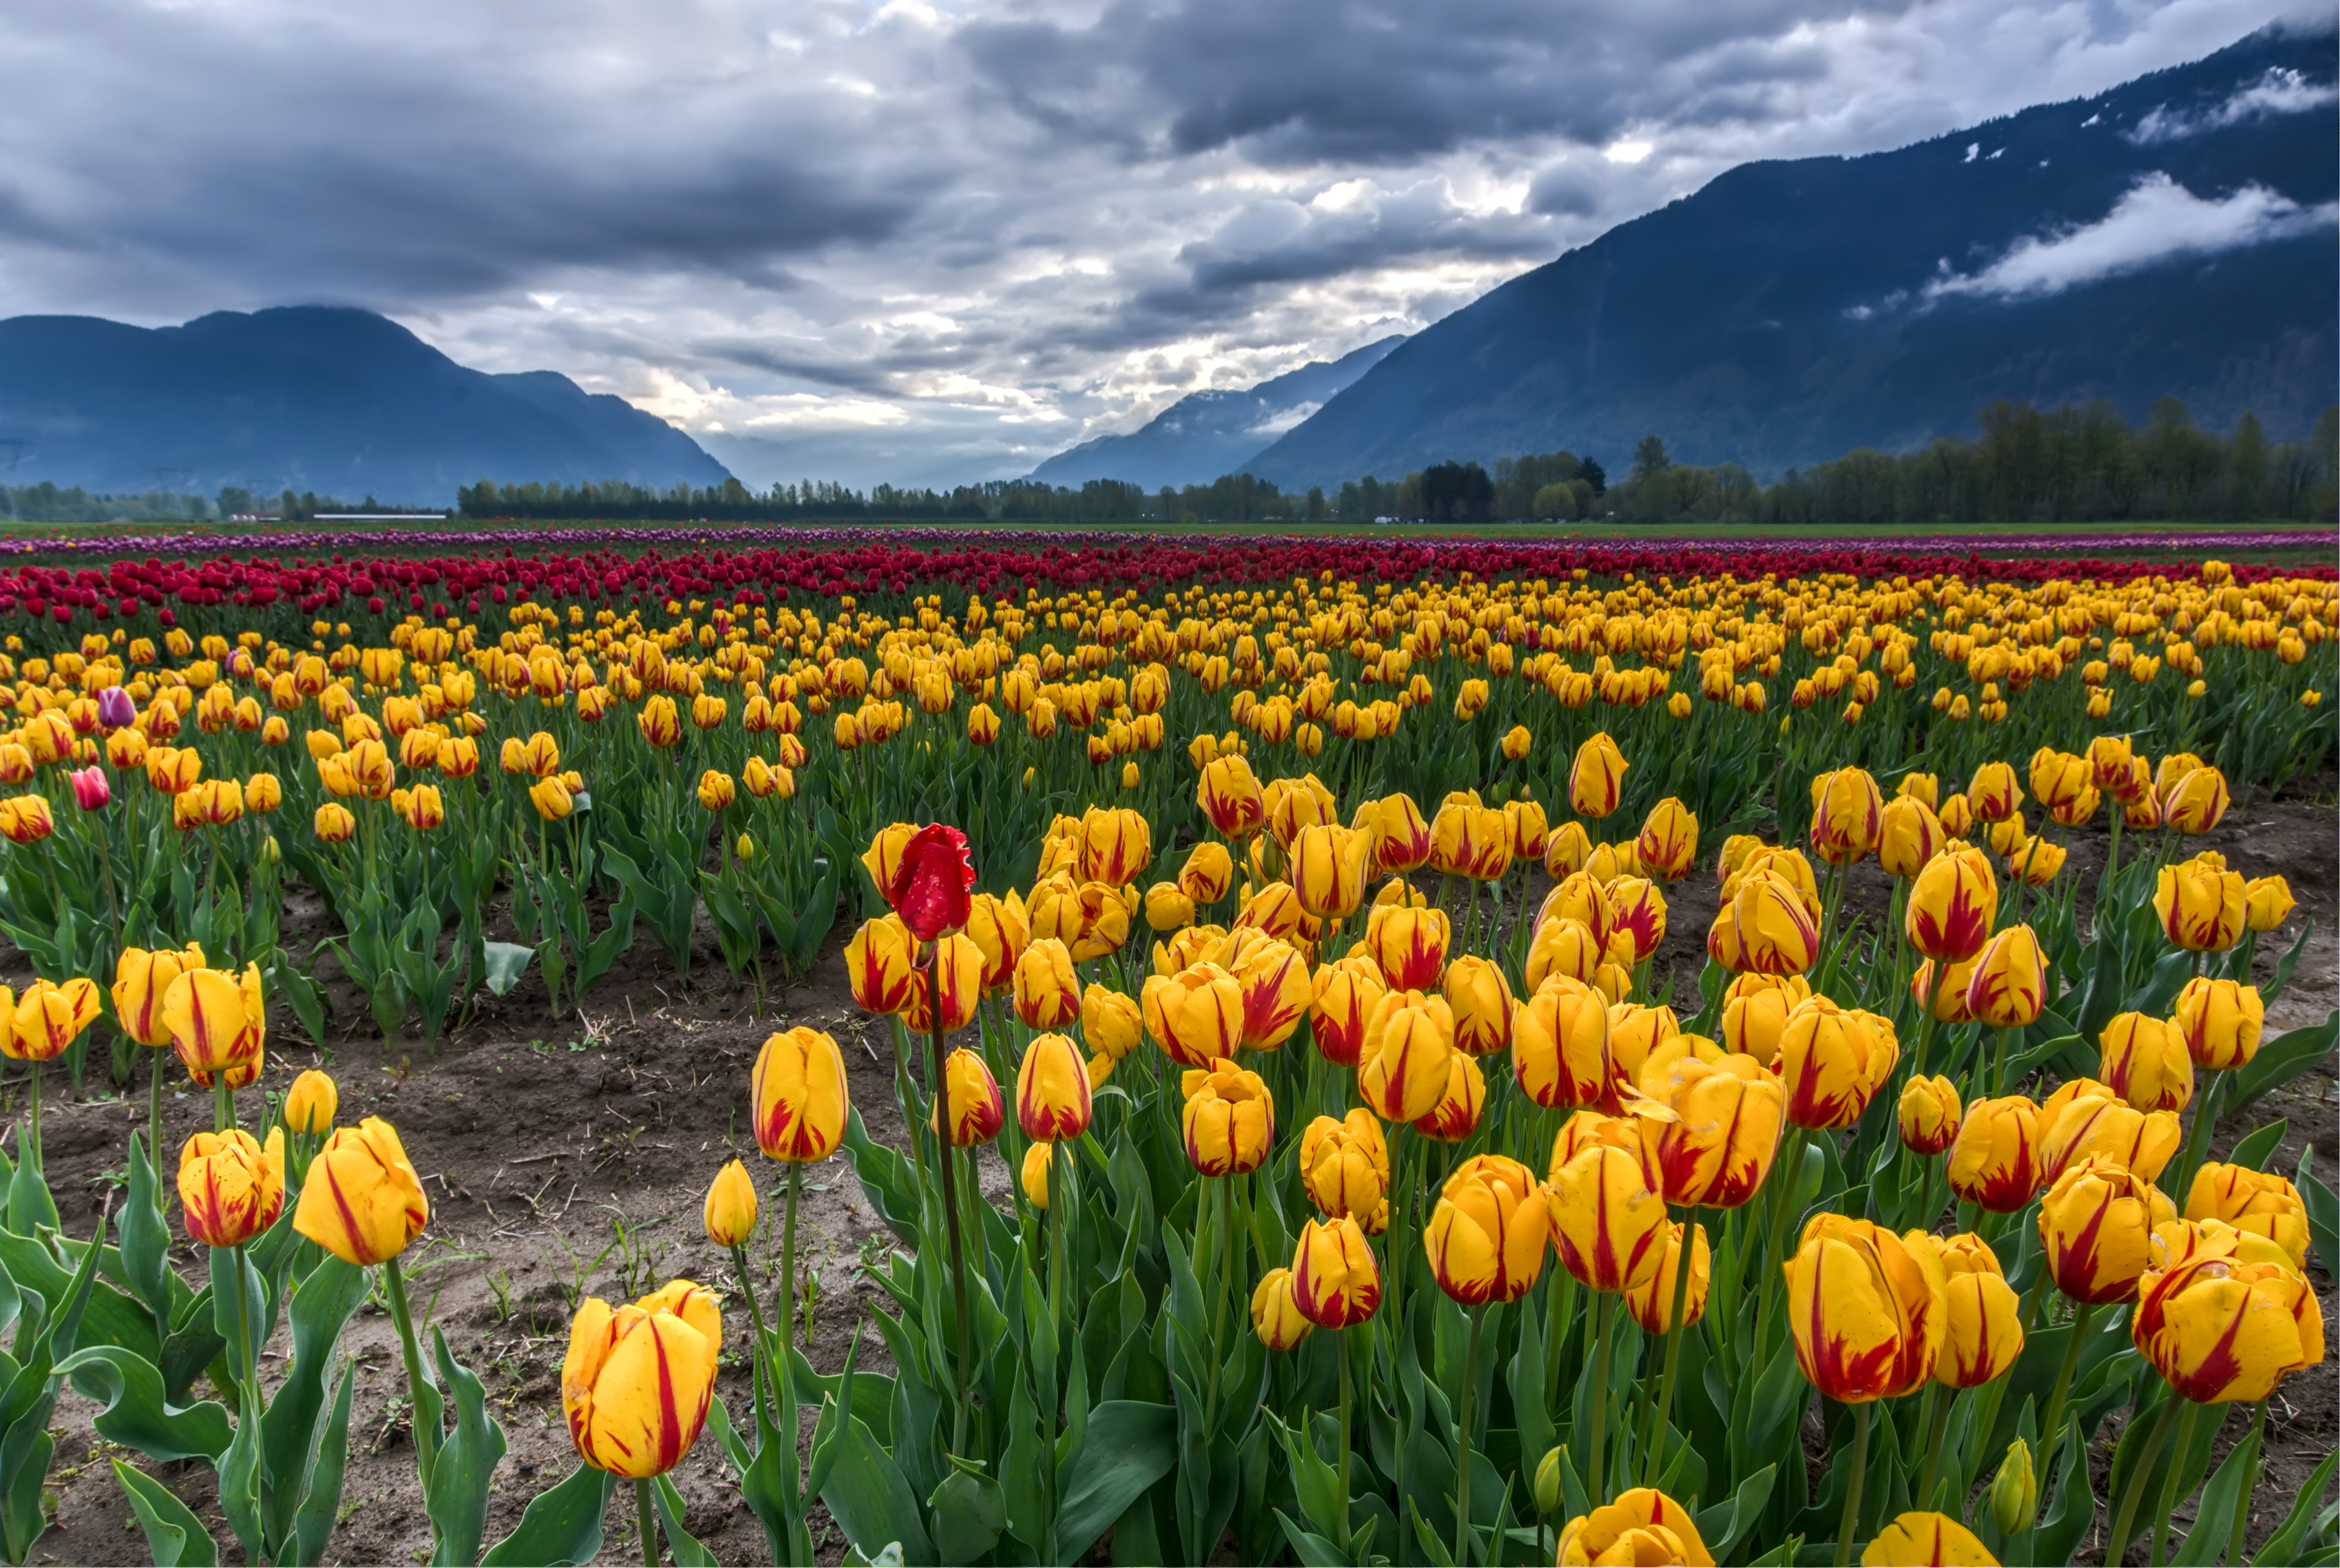 Wallpaper Yellow and Red Tulips Field Under White Clouds and Blue Sky During Daytime, Background Free Image